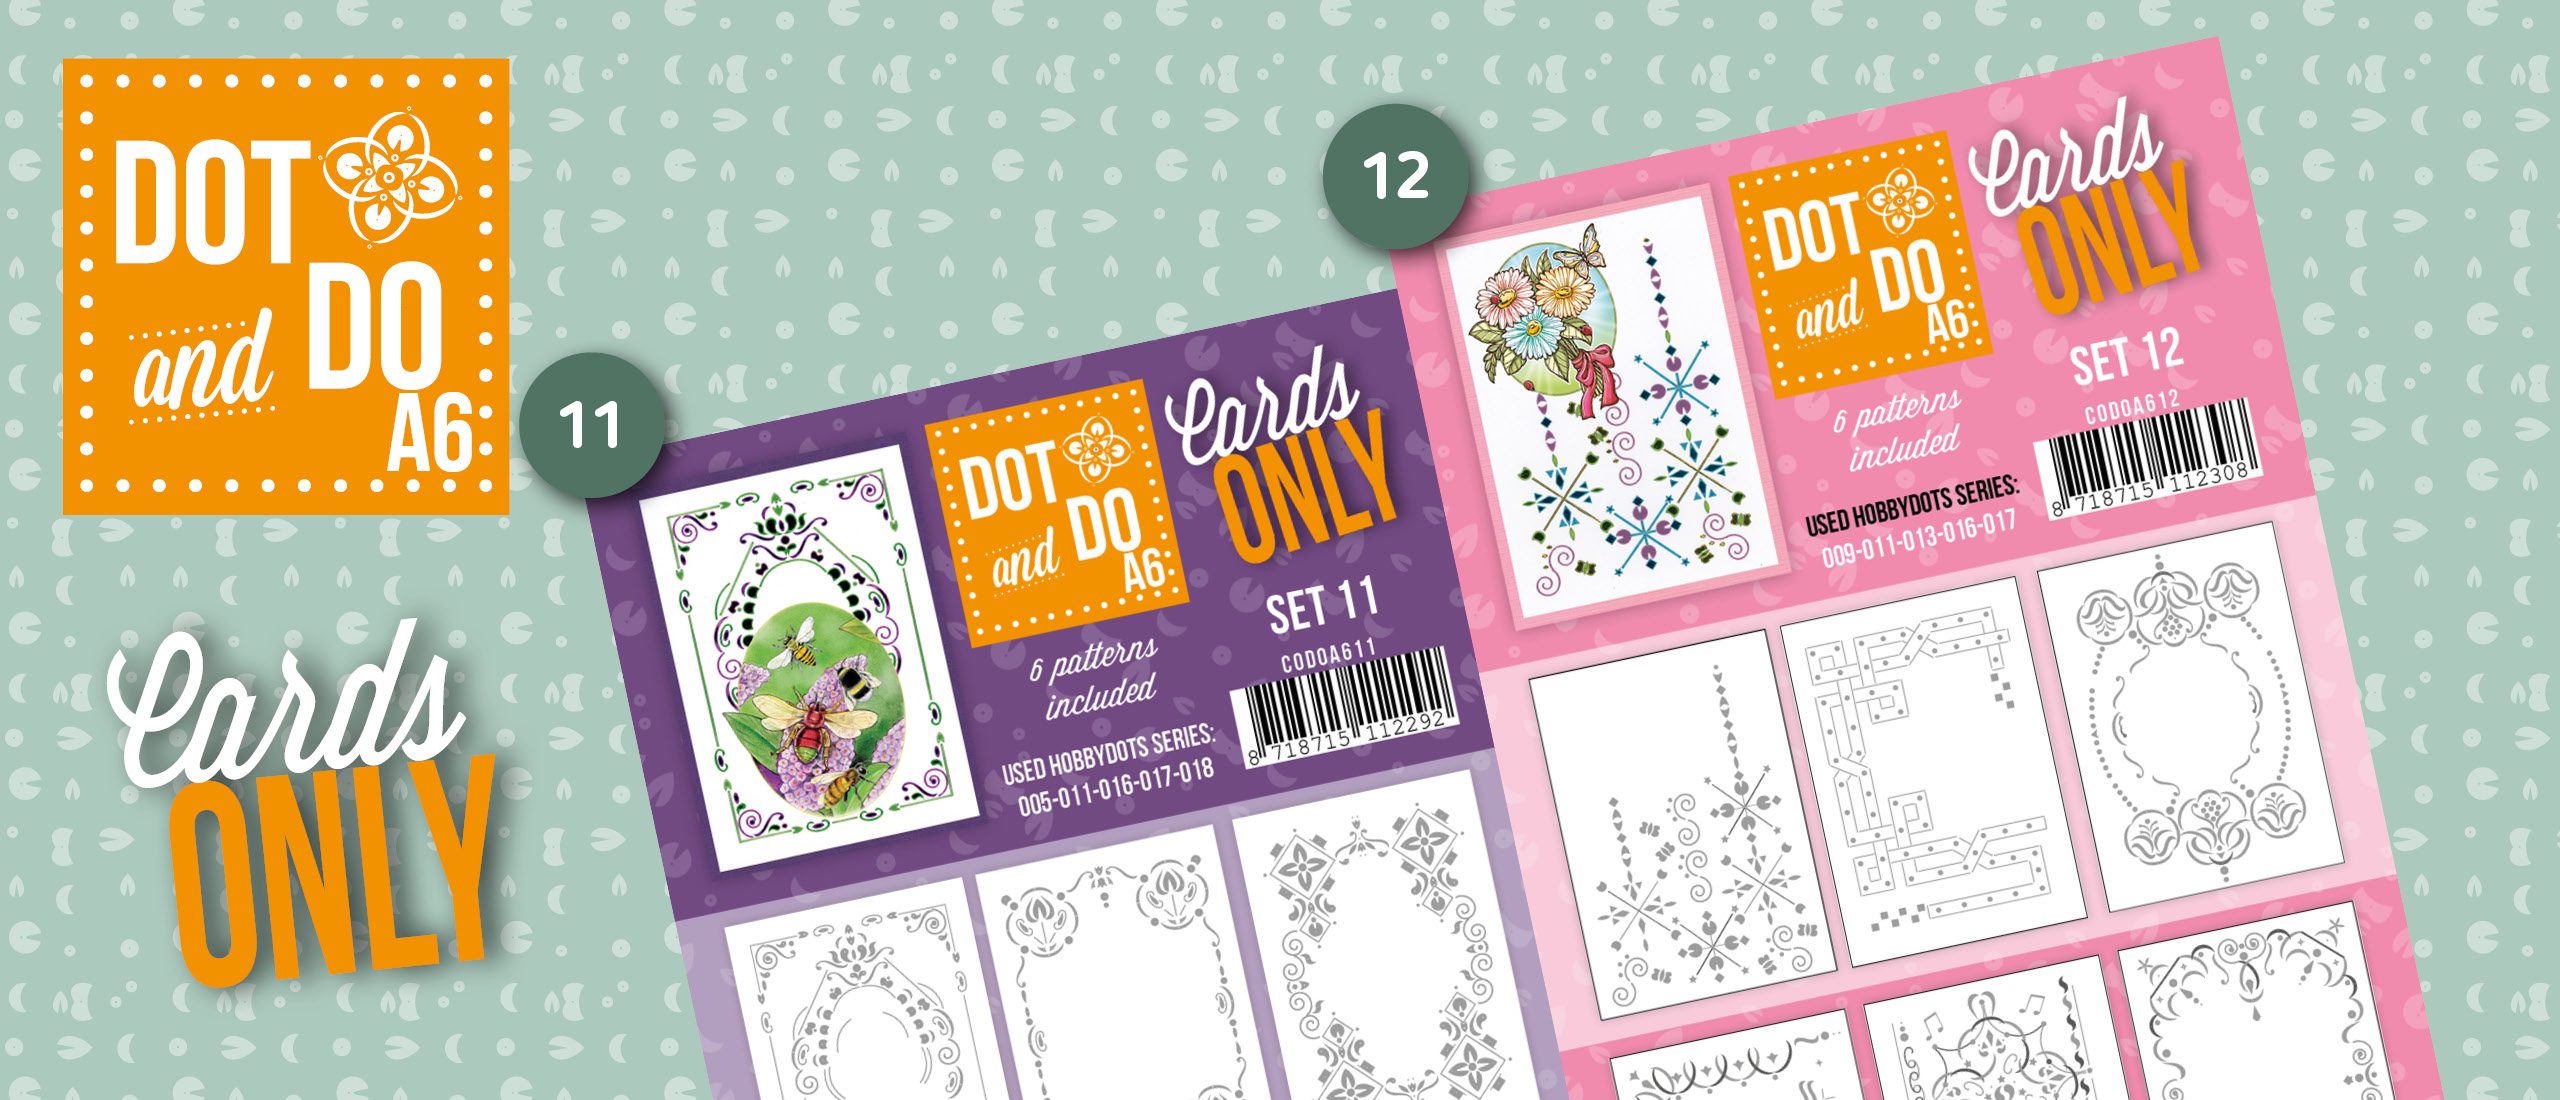 Dot and Do - Cards Only - Set 11 -12 (CODOA611-CODOA612)